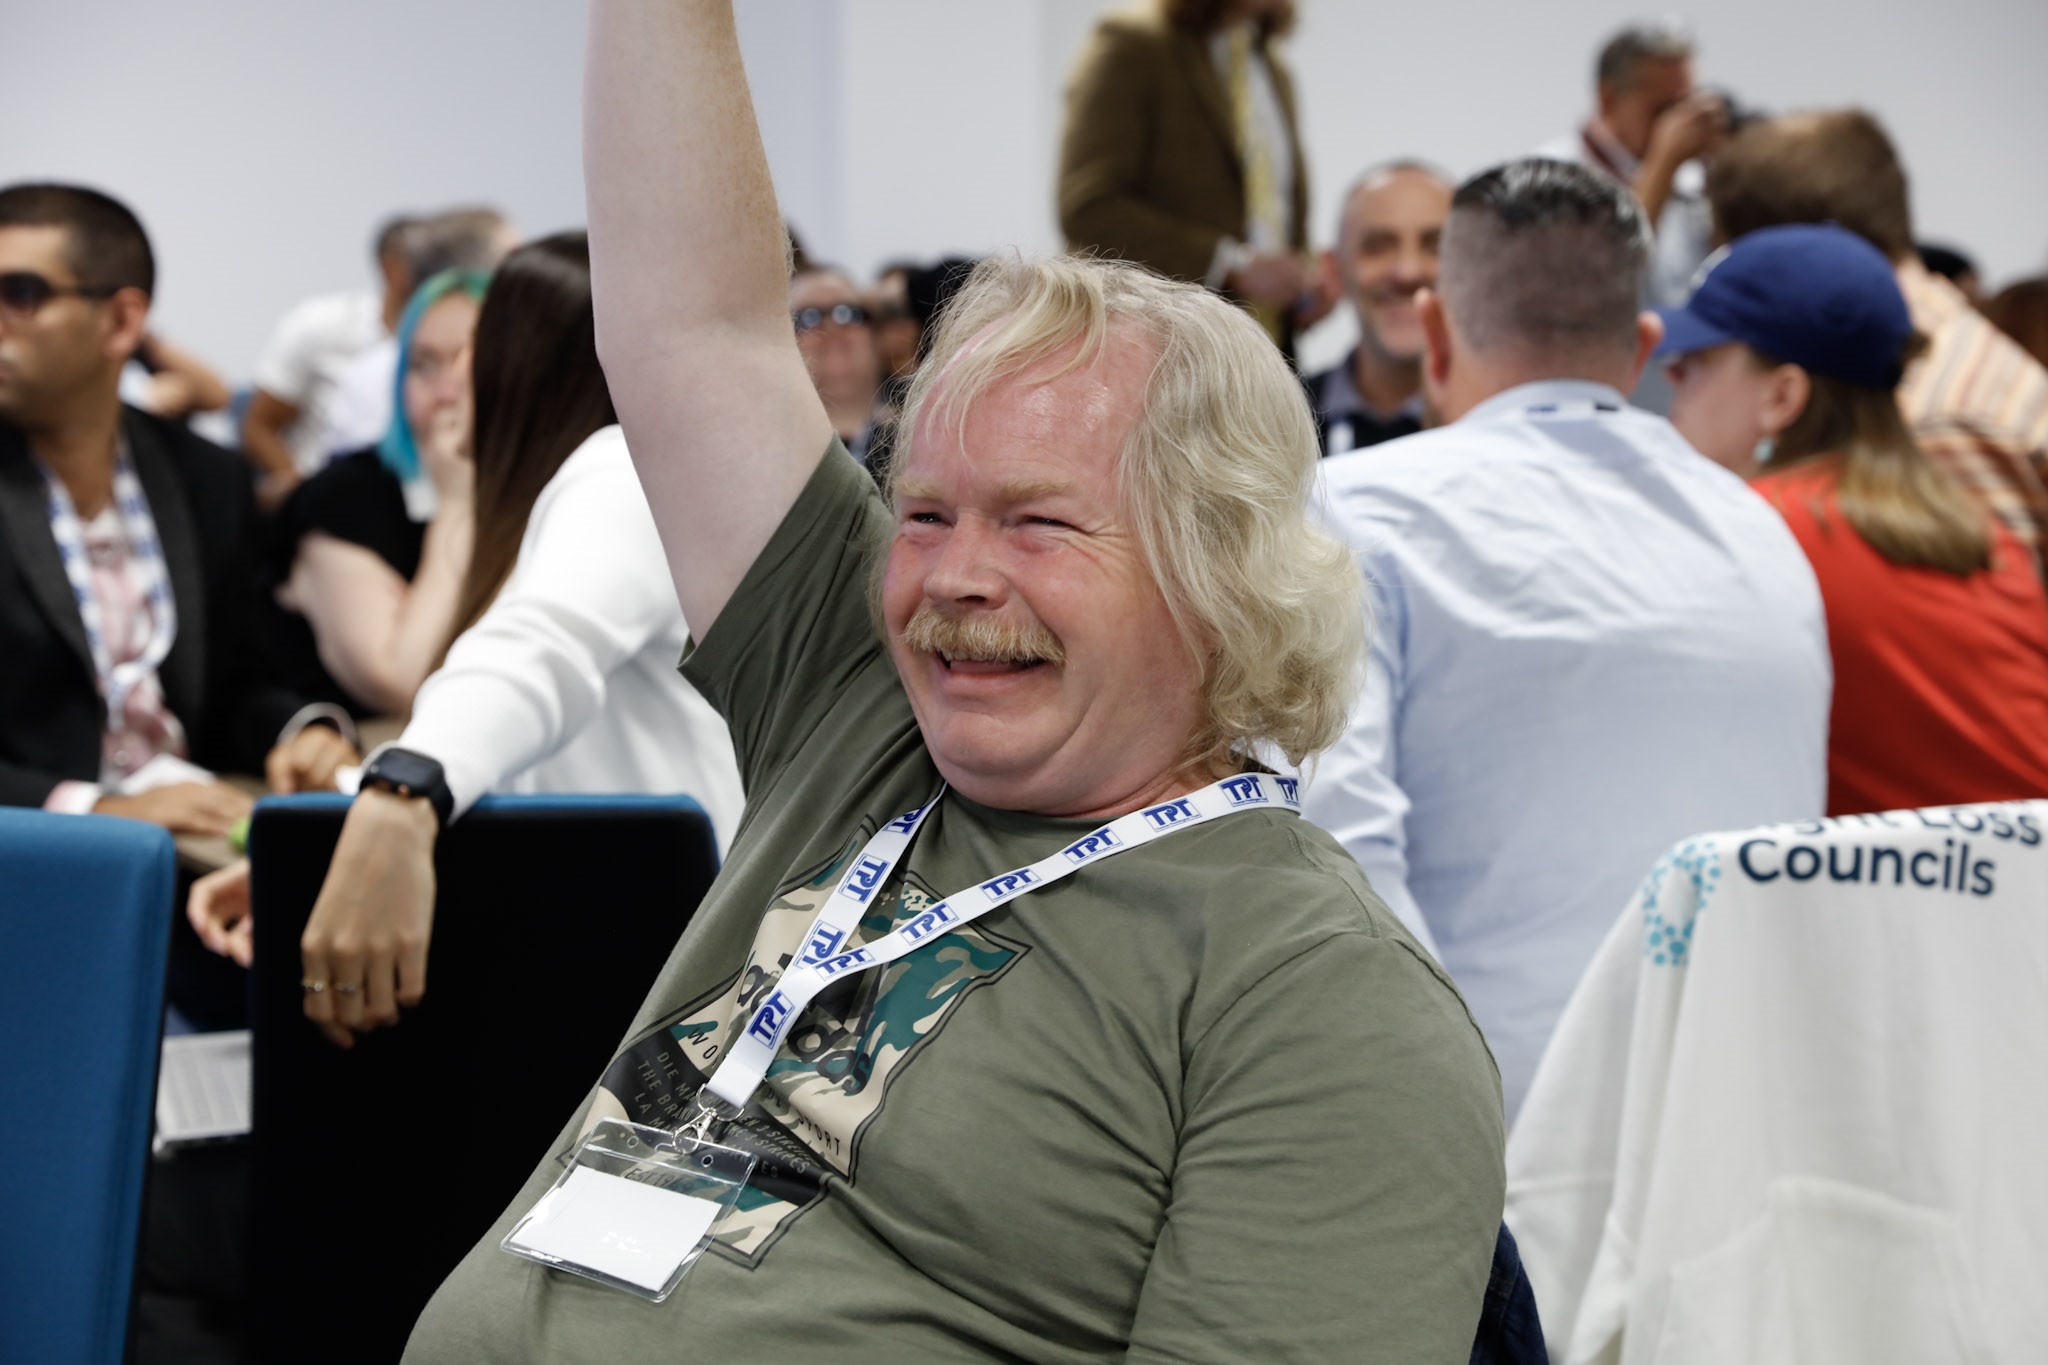 Steve Keith, Birmingham and Black Country SLC member, pictured with his hand in the air whilst smiling during a workshop